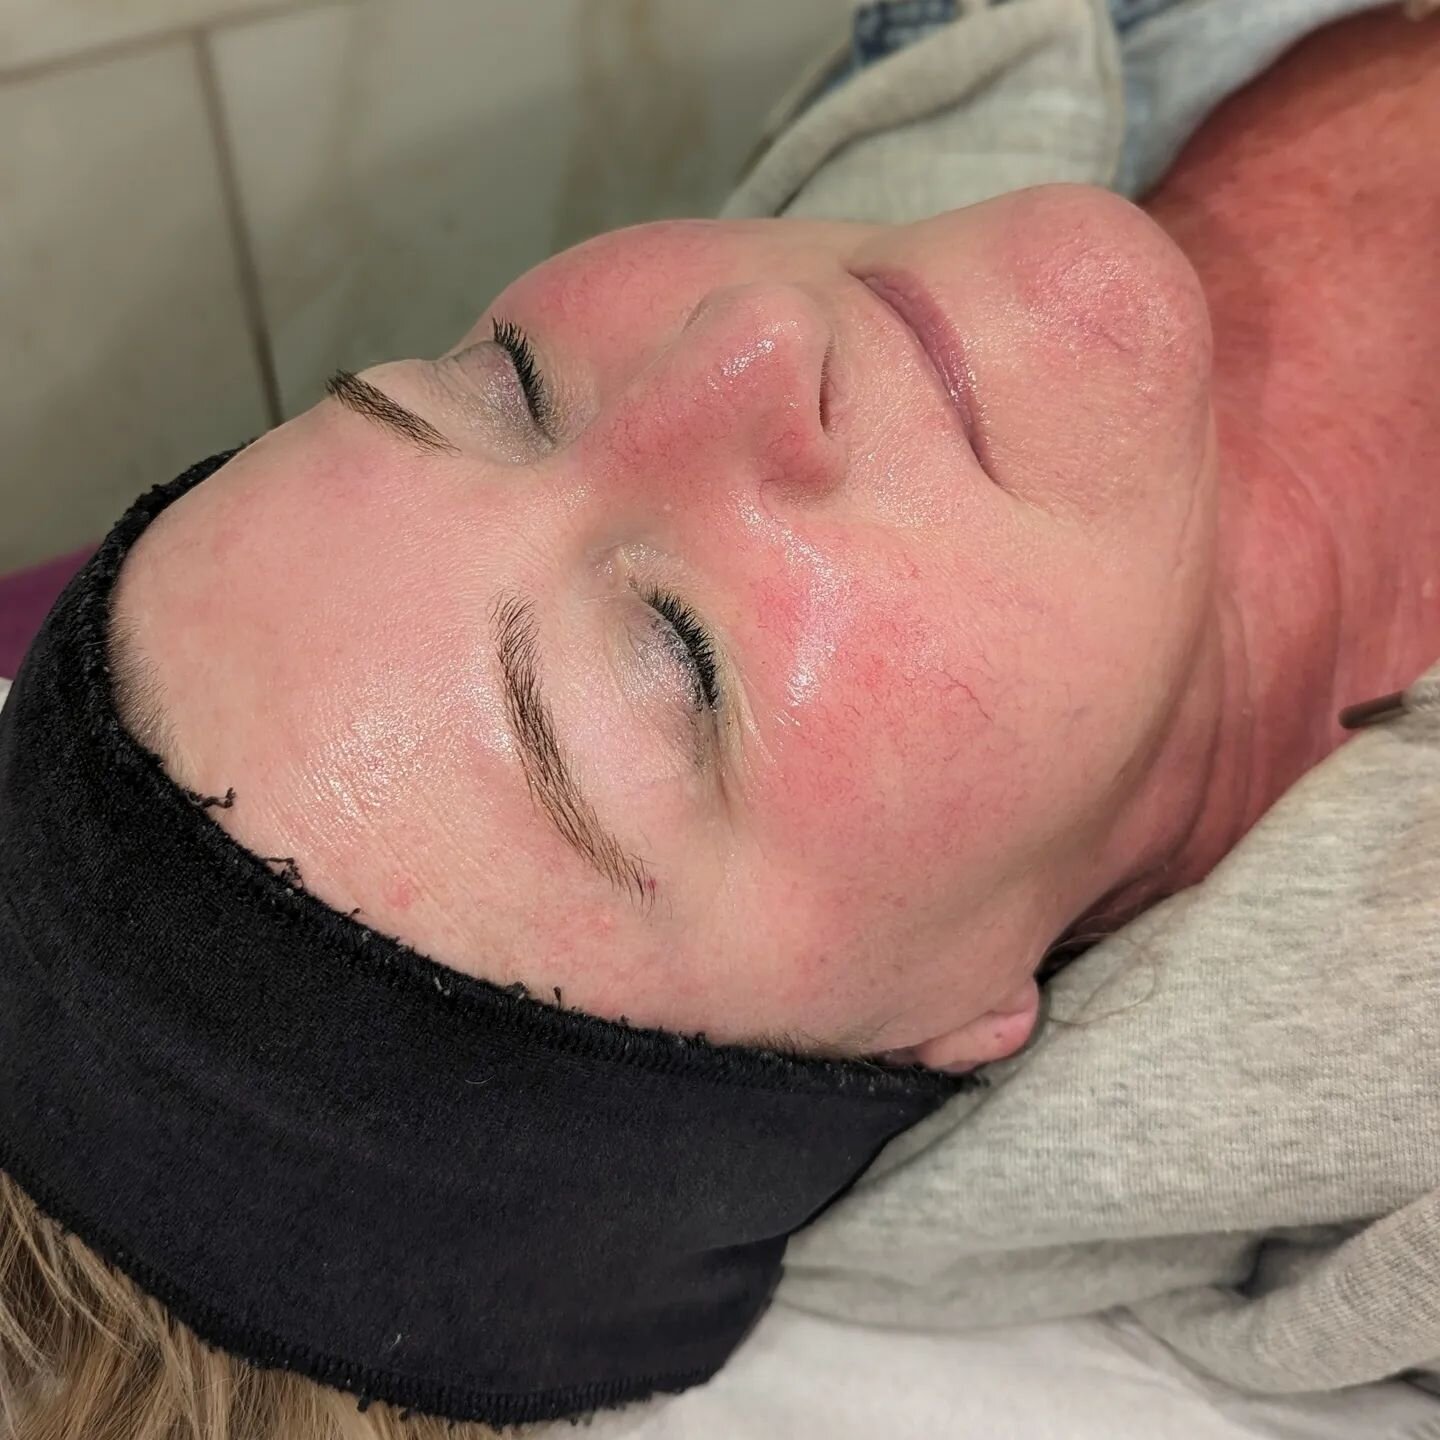 DERMAPLANING ☀️ Results Straight After Treatment With Erin.

What Are The Benefits Of Dermaplaning?
☀️Provides Deeper Product Penetration.
☀️Removes Soft Facial Hair That Traps Dirt &amp; Oils.
☀️Promotes Smoother Skin.
☀️Safe Procedure For Removing 